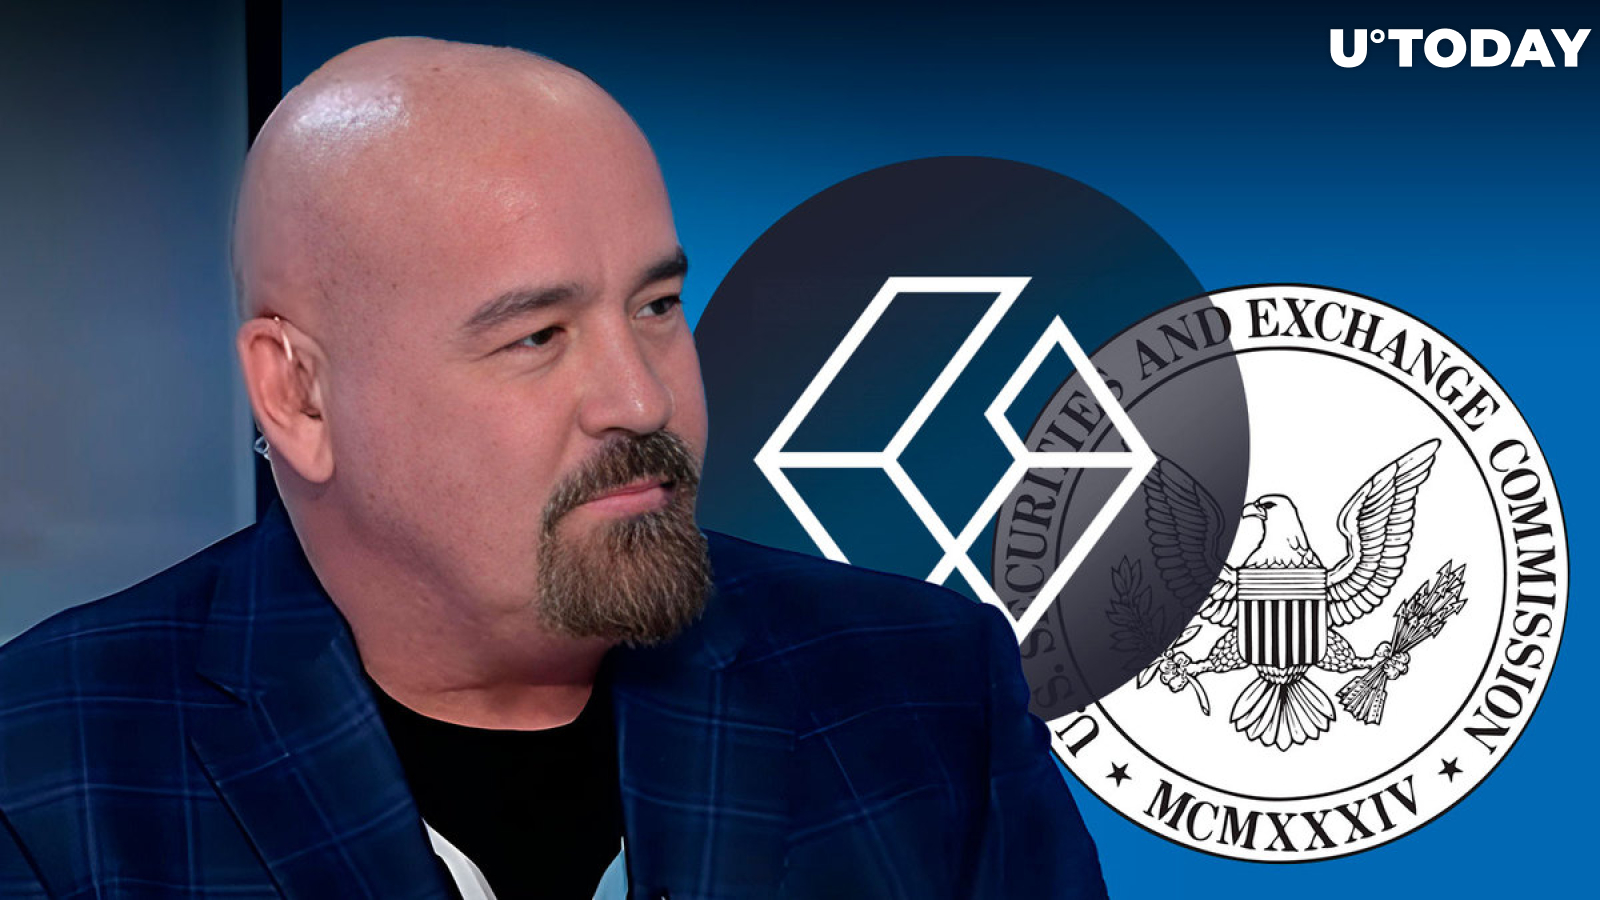 SEC-Grayscale Decision Expected This Week, Crypto May Gain Bigger Momentum: John Deaton